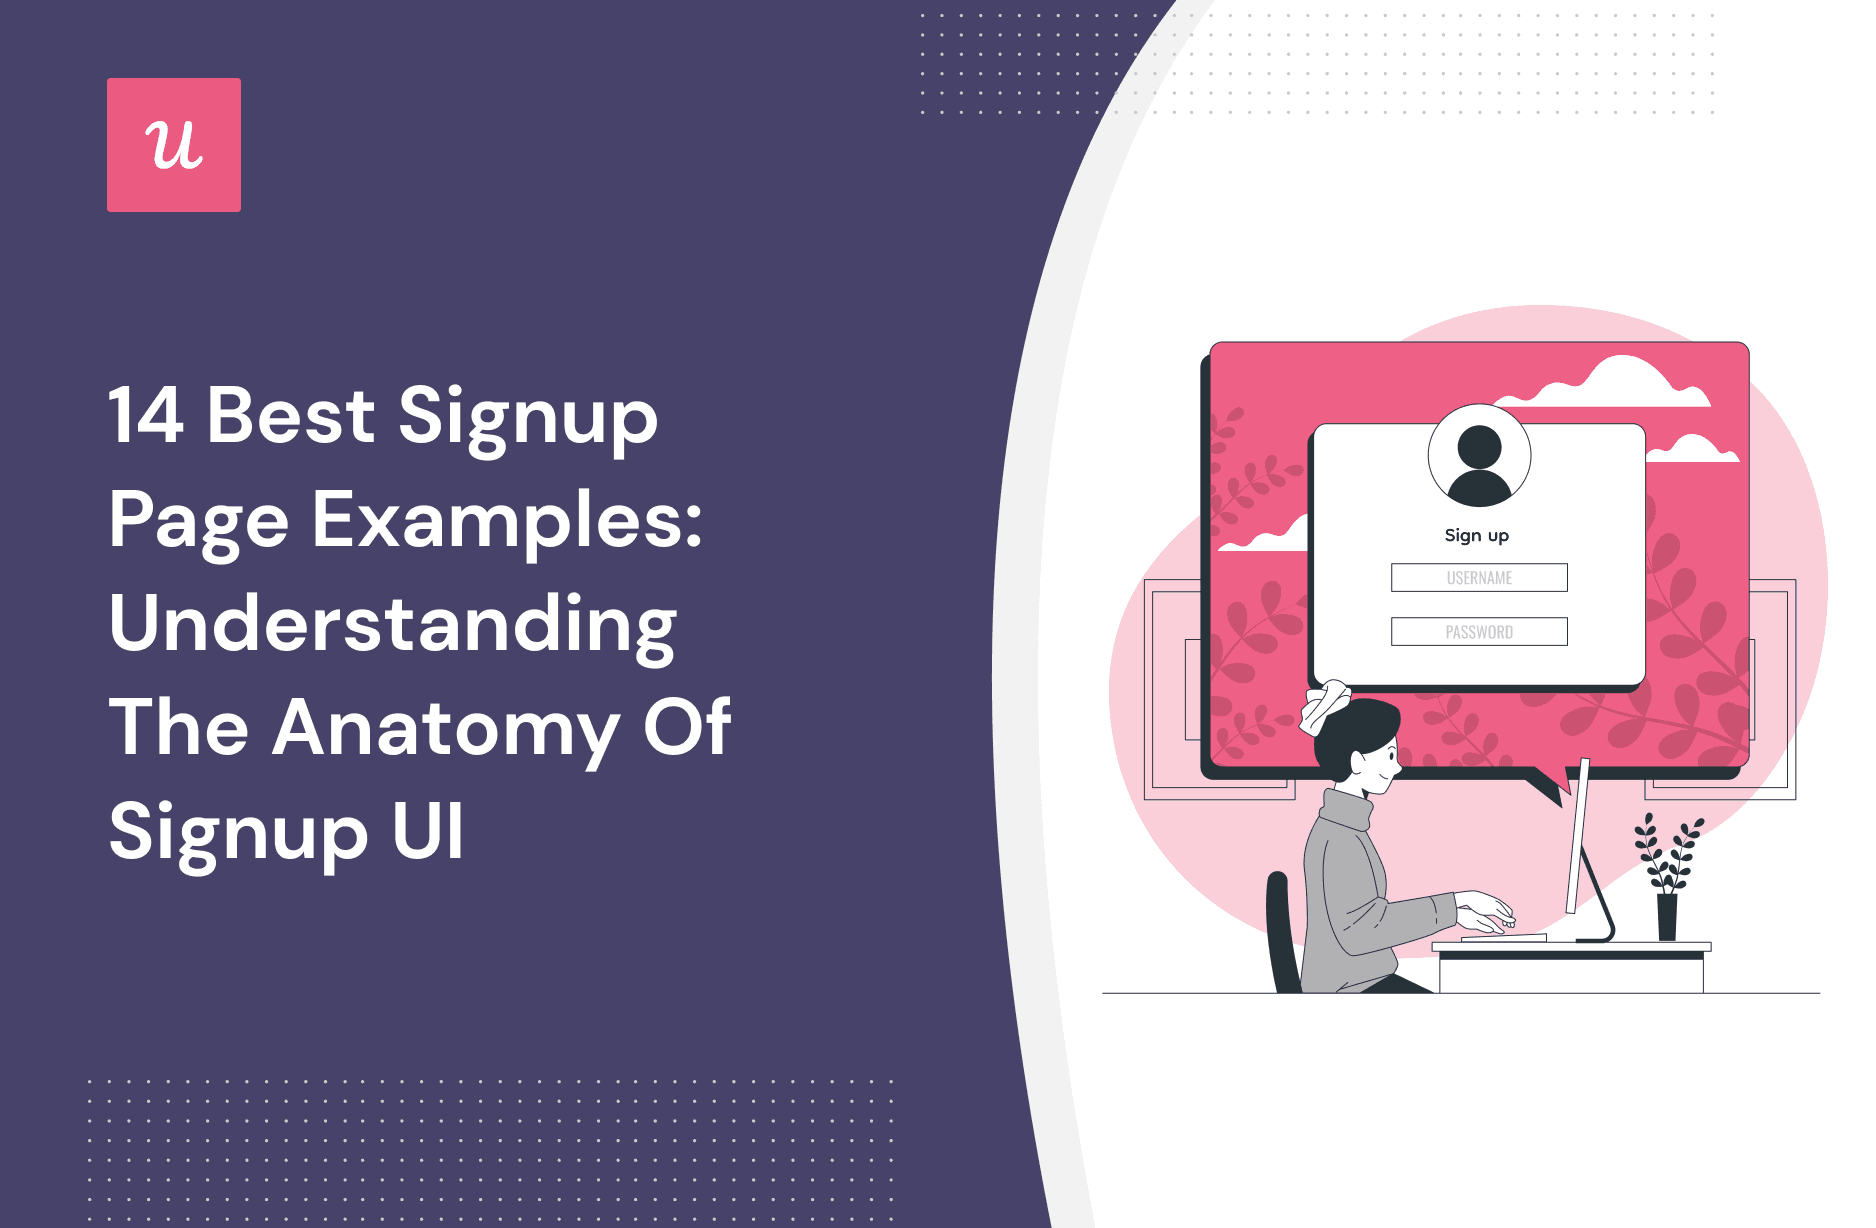 14 Best Signup Page Examples: Understanding the Anatomy of Signup UI cover